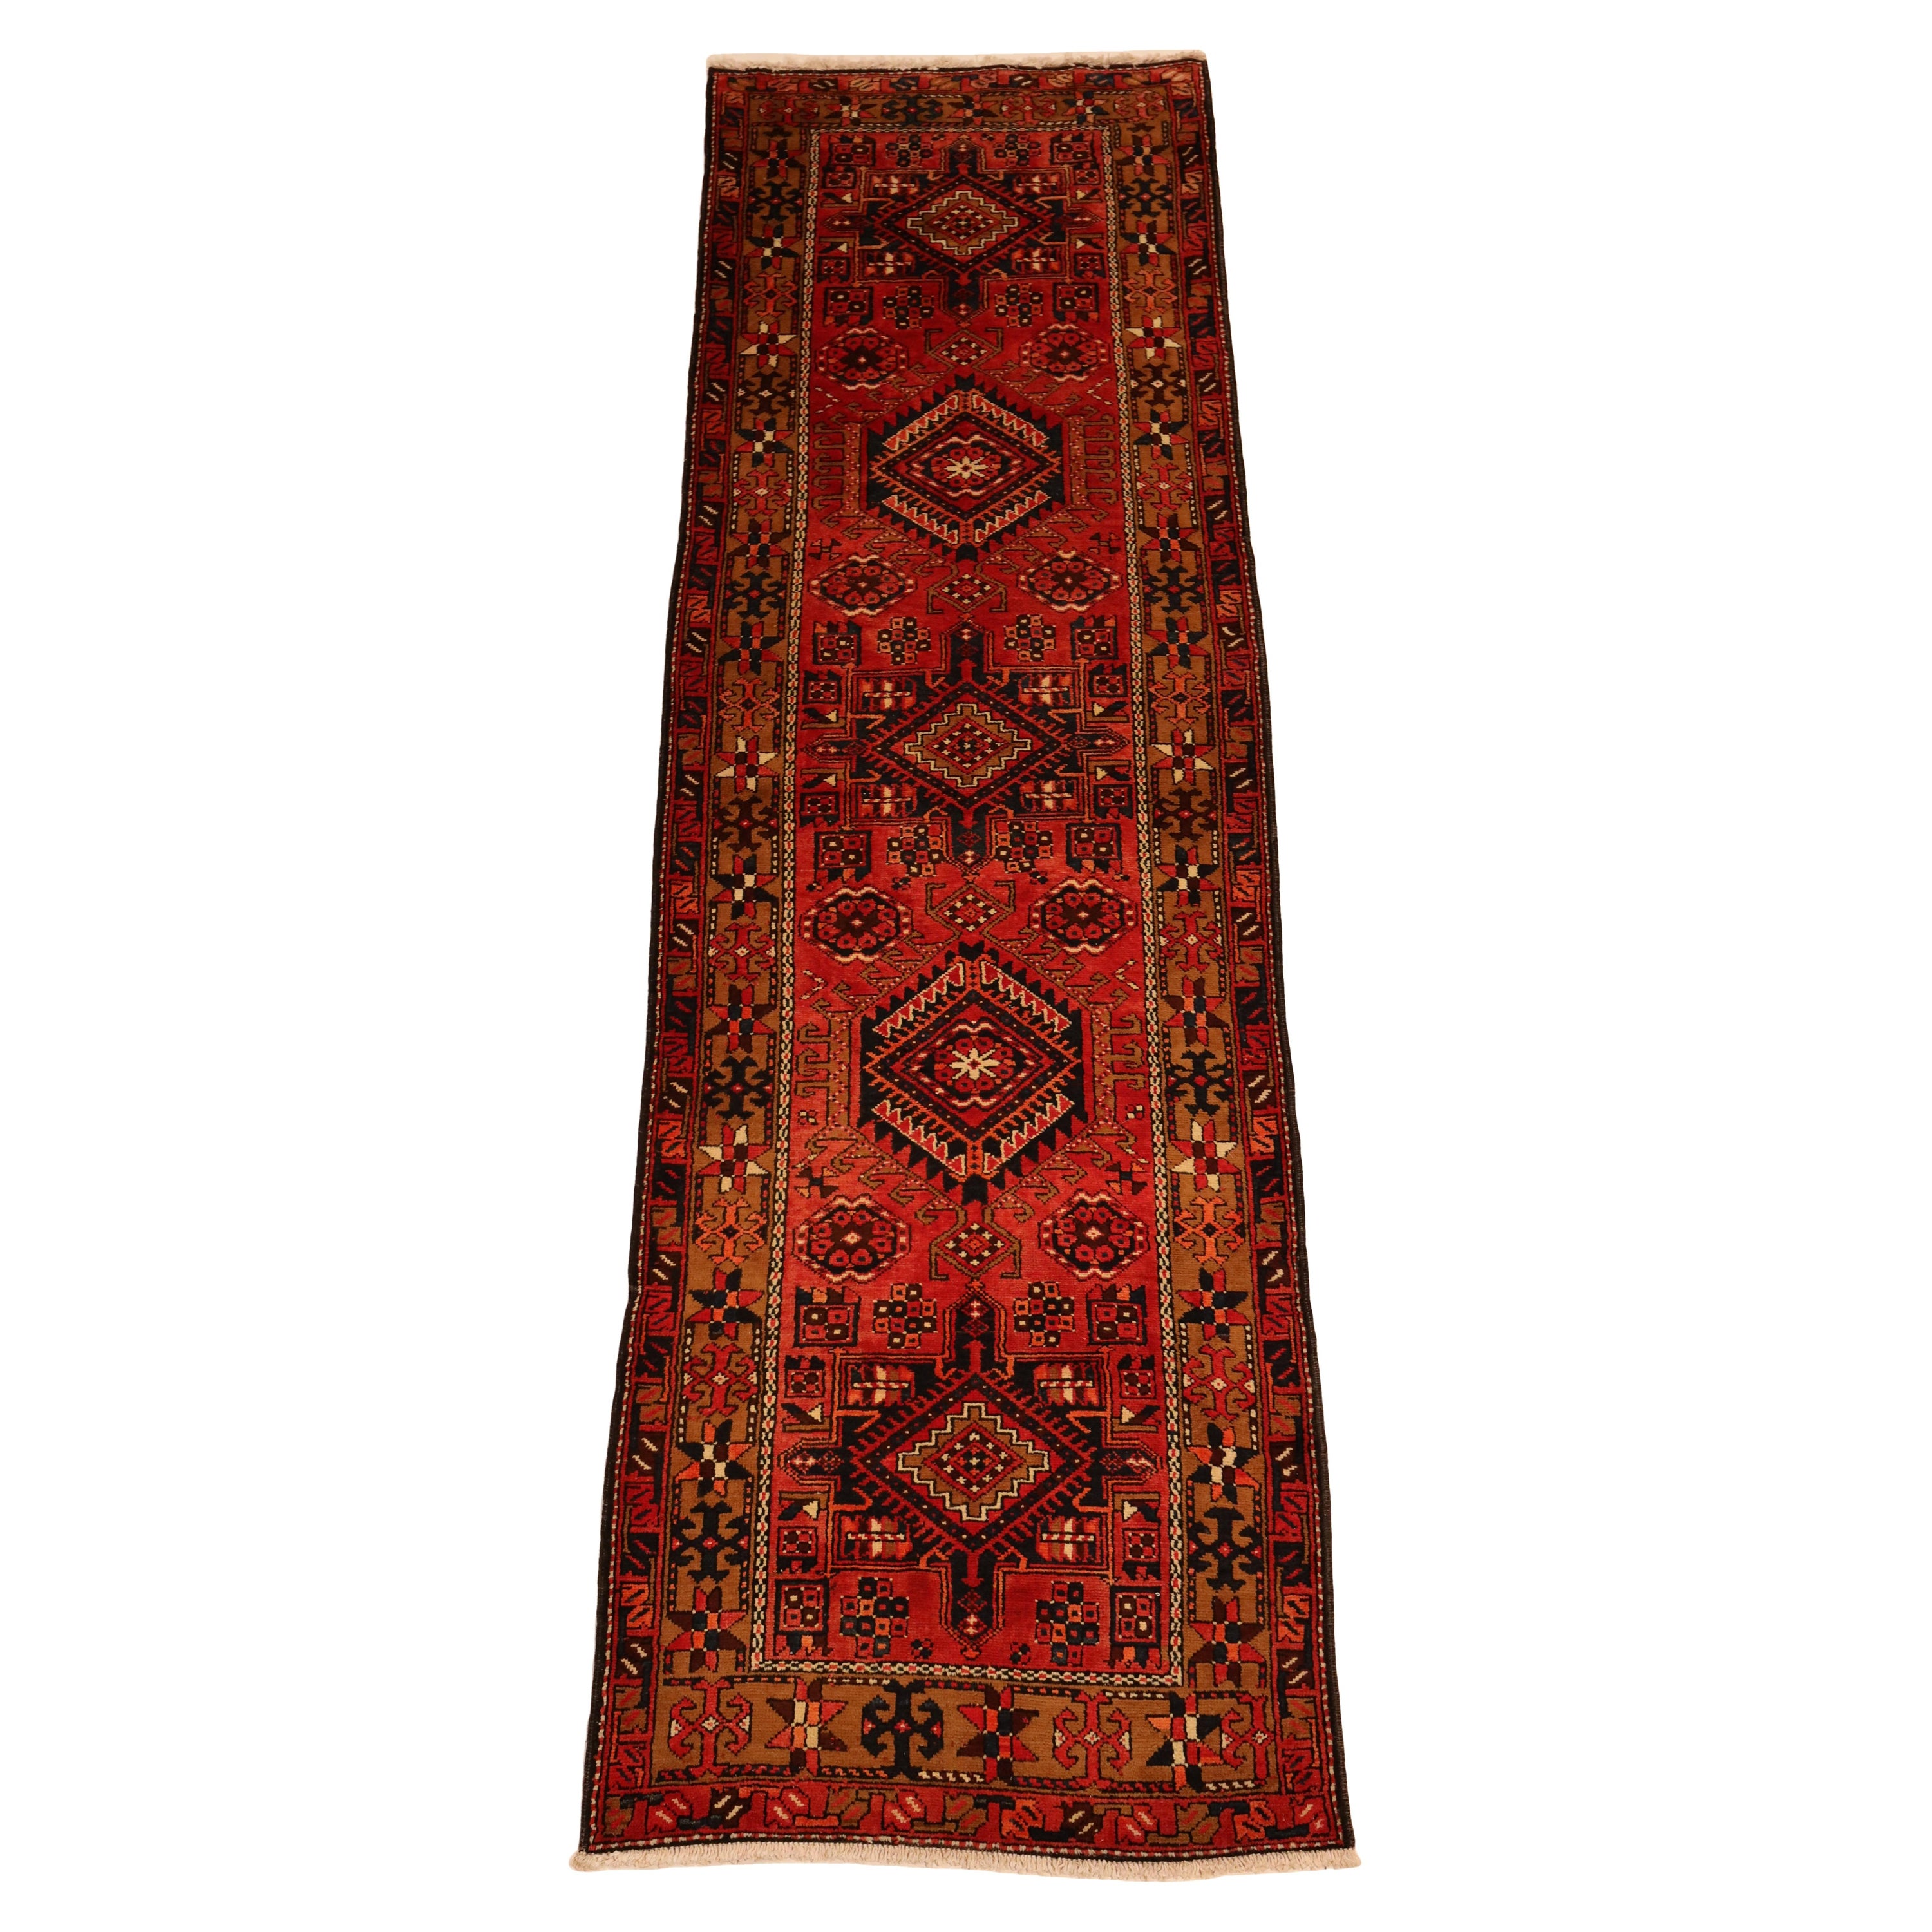 North-West Persian Vintage Runner - 3'3" x 11'4" For Sale